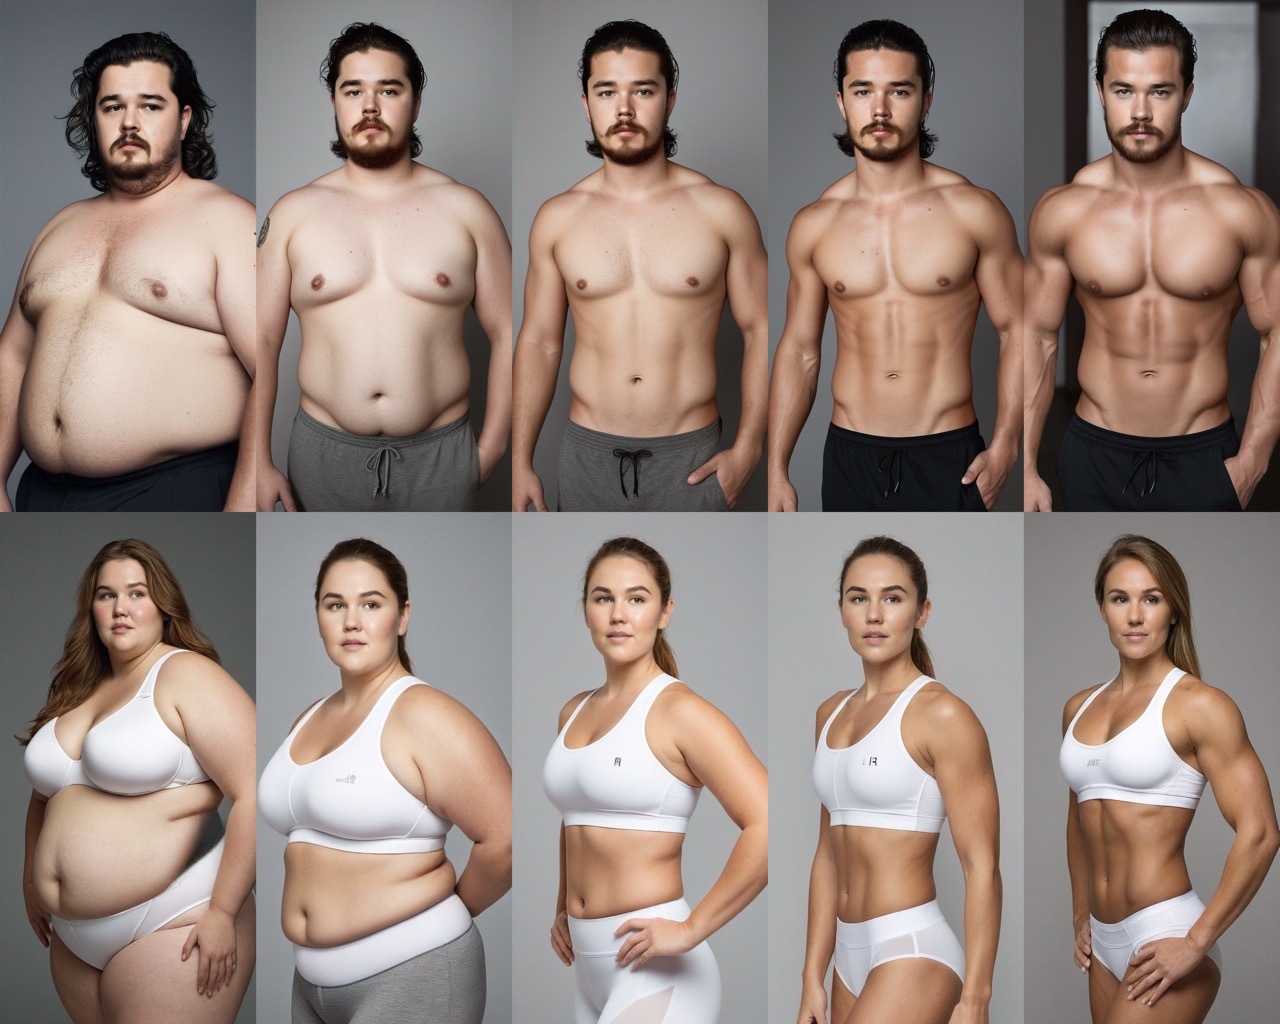 What Is Body Transformation?